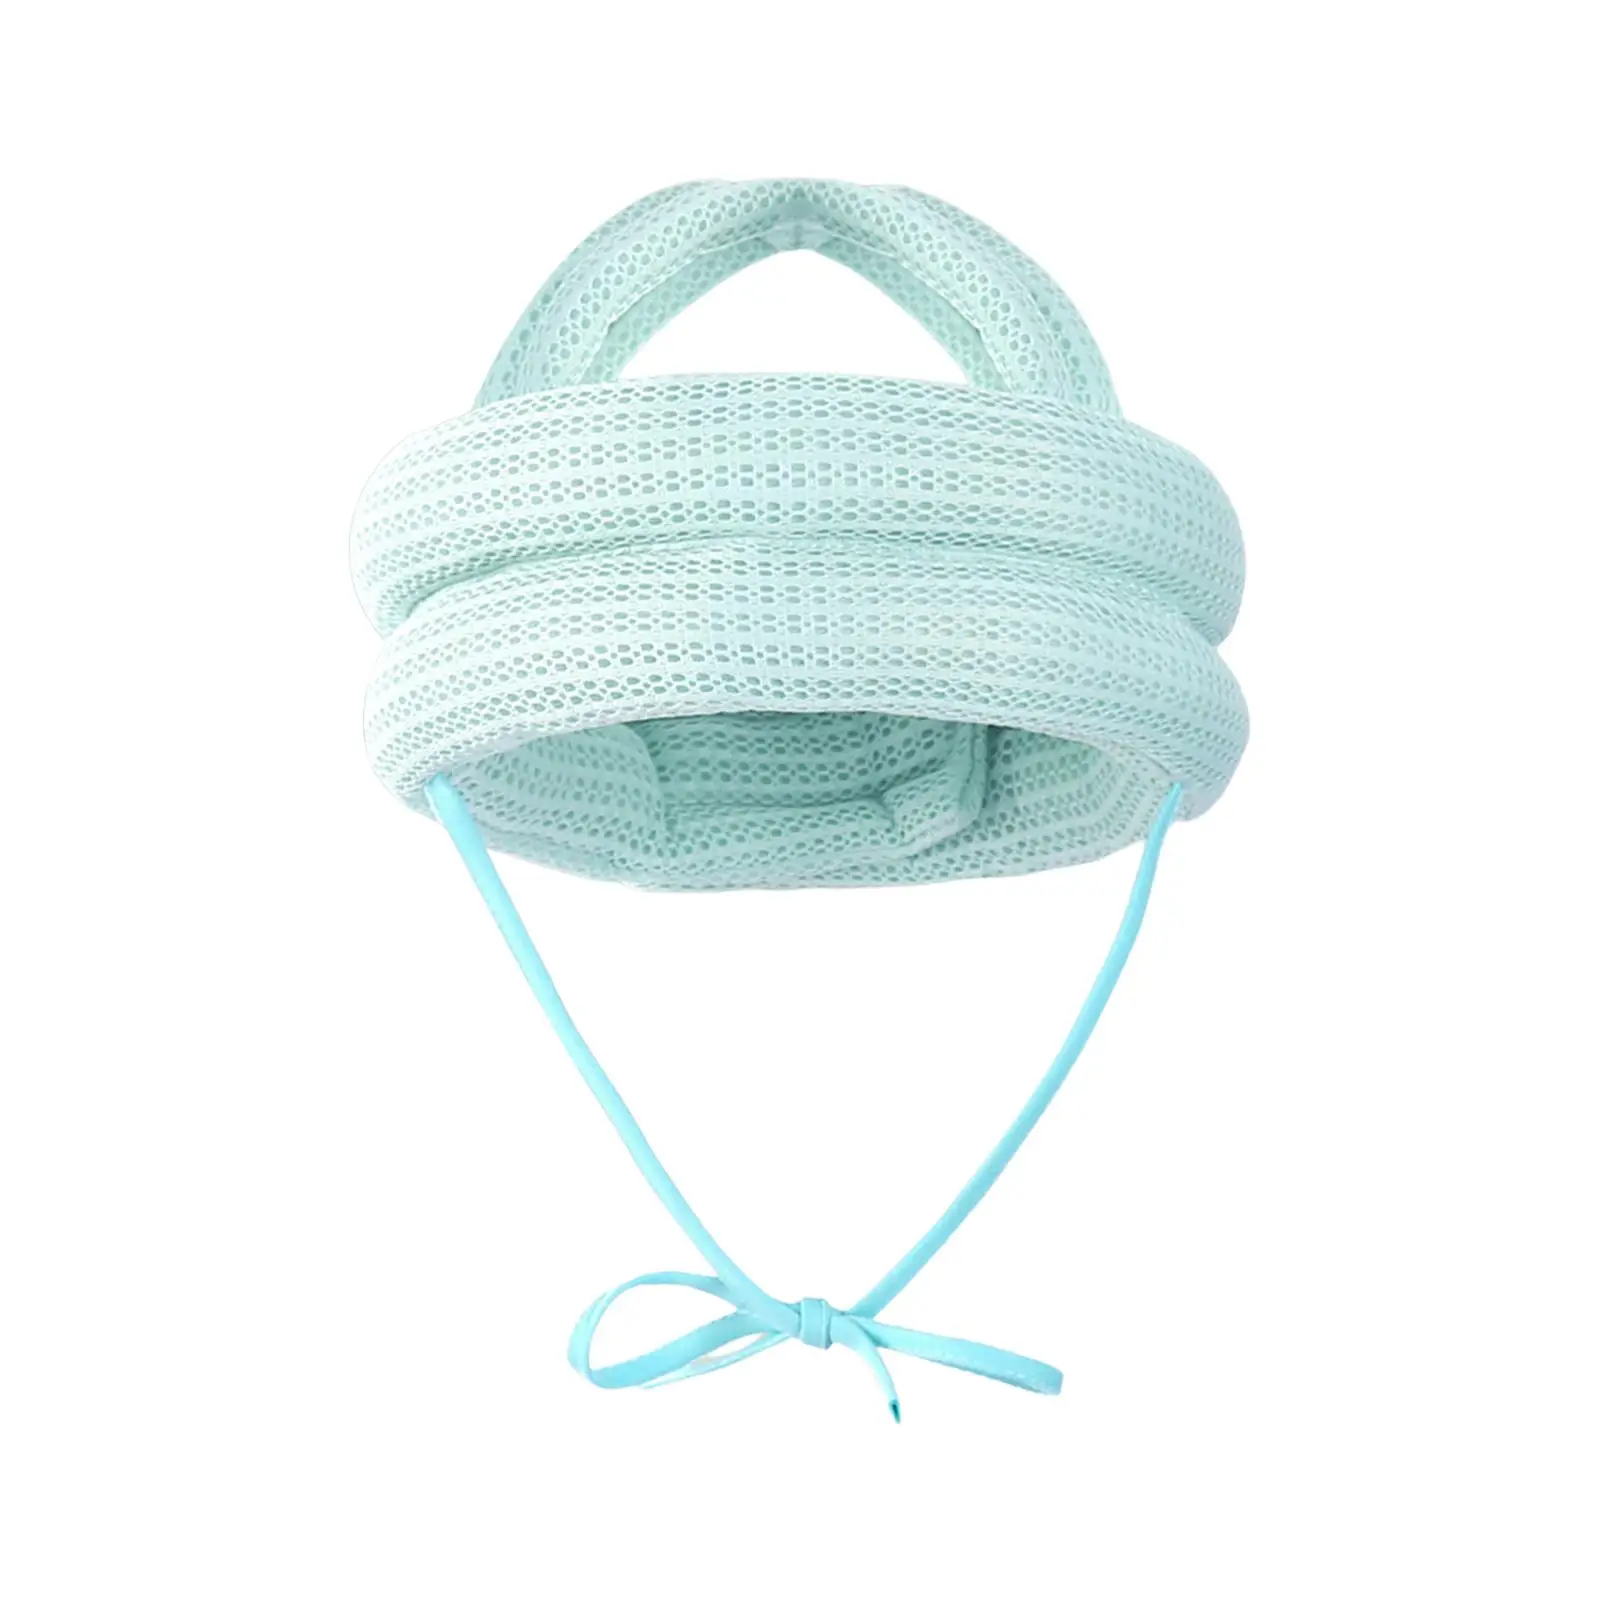 Infant Head Protective Hat Protective Harnesses Cap for 0-5 Years Old